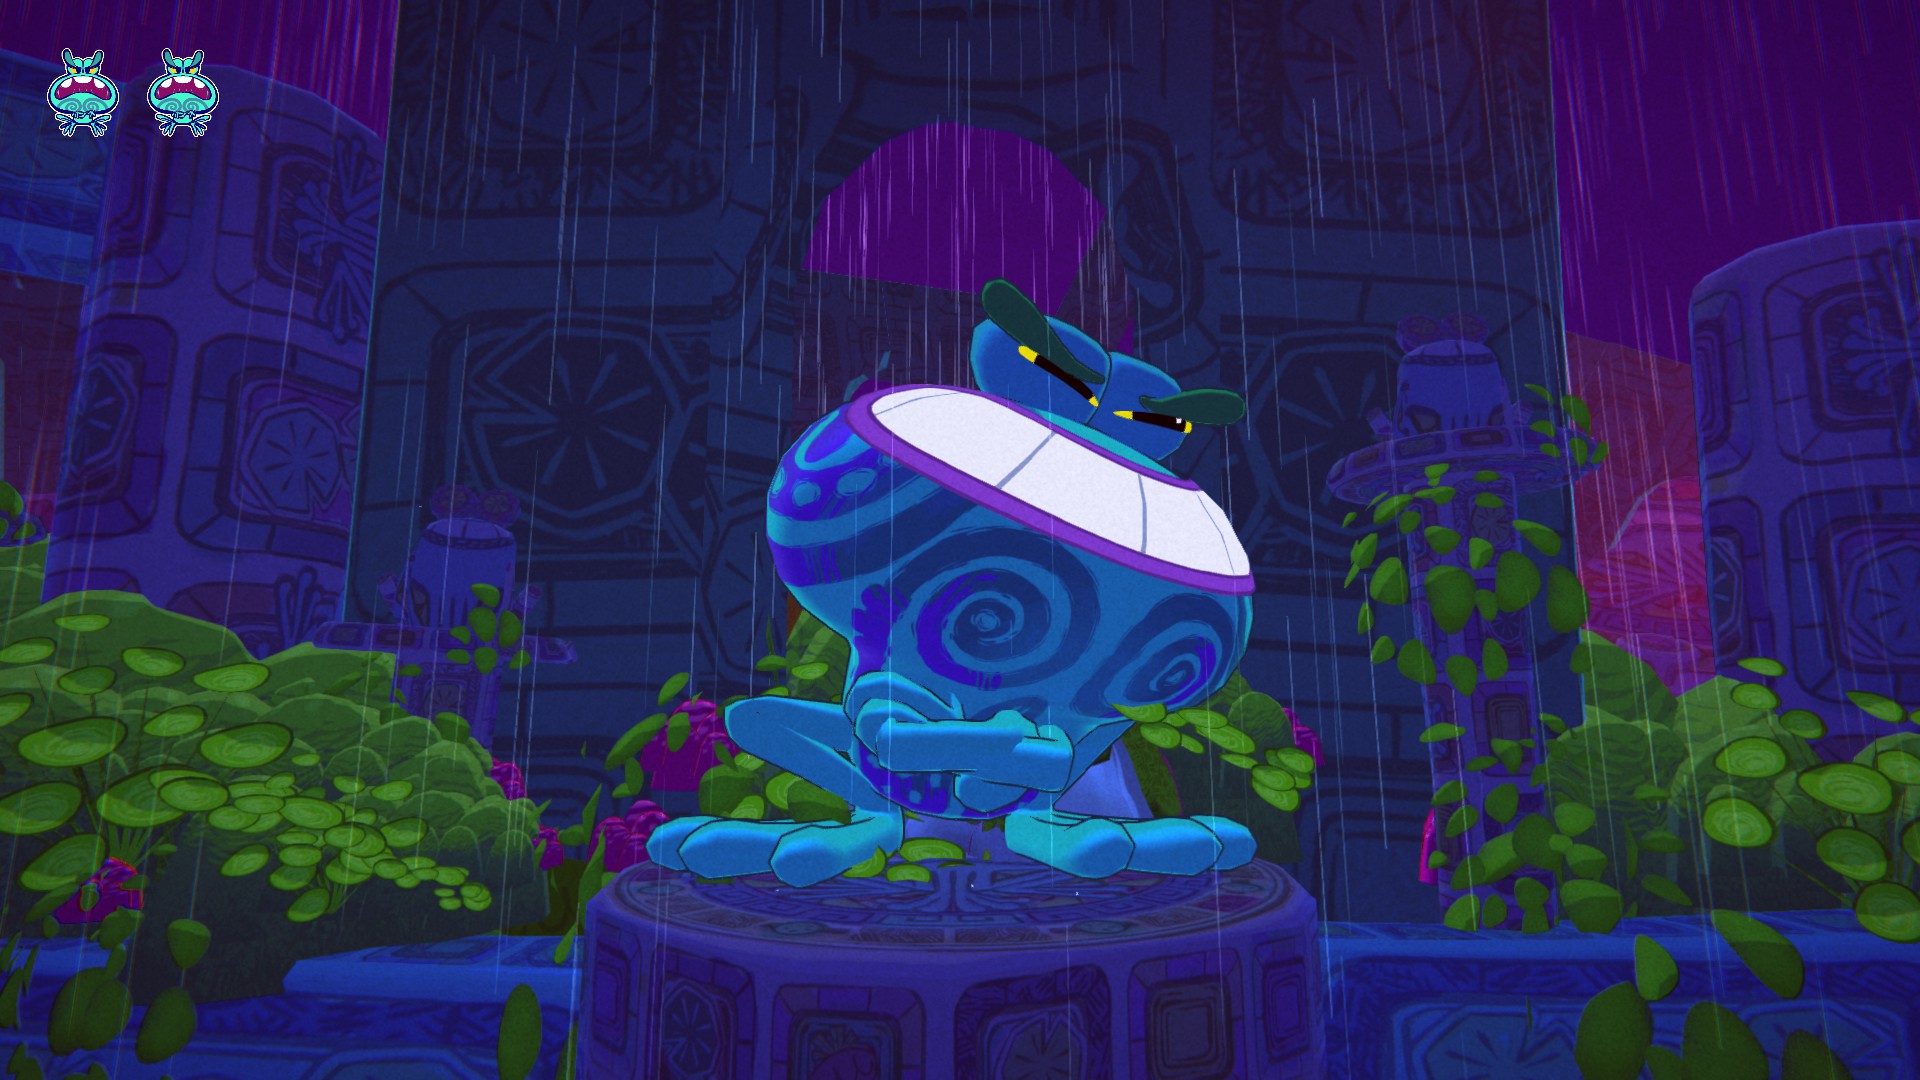 A giant blue frog smiling in the rain, it sits atop a stone platform. Large ruins and tree are seen in the back ground.